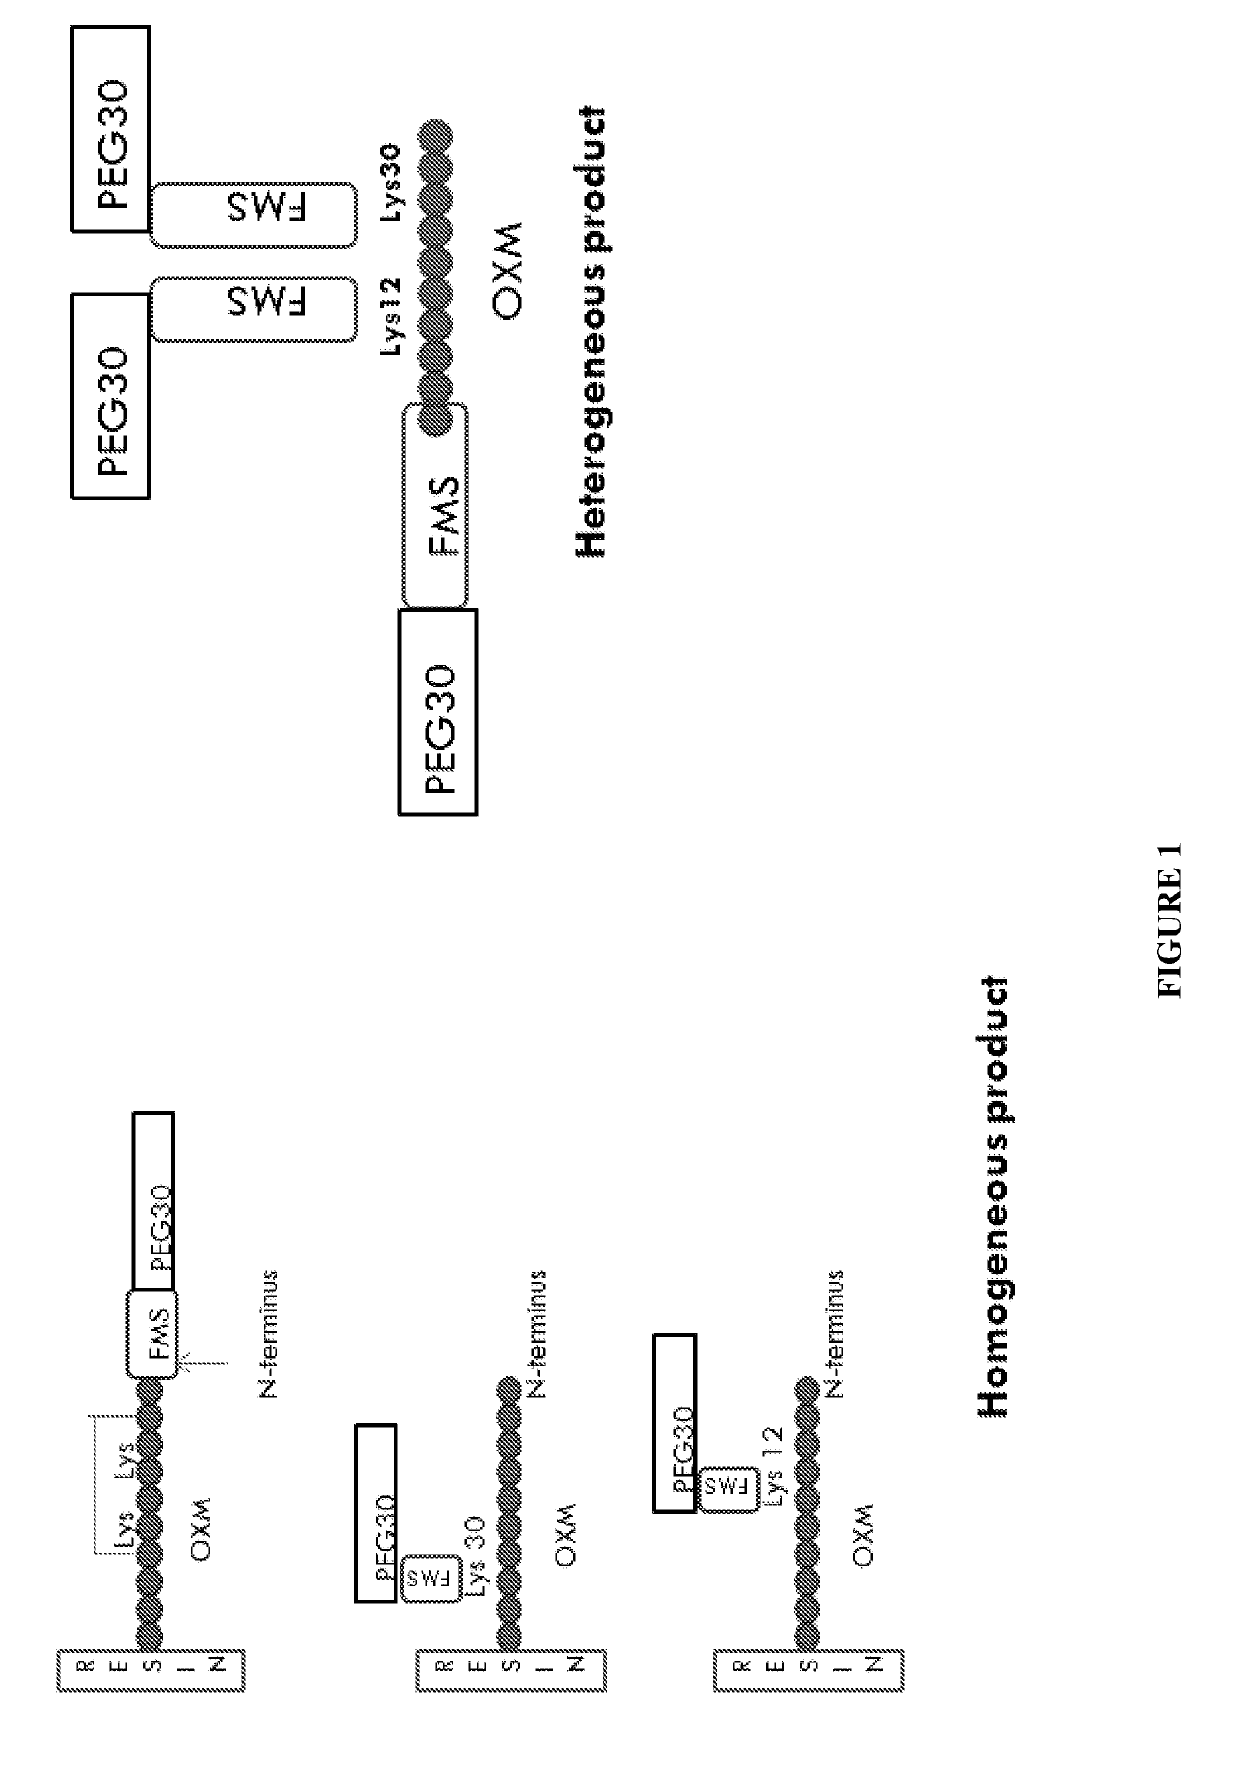 Long-acting oxyntomodulin formulation and methods of producing and administering same